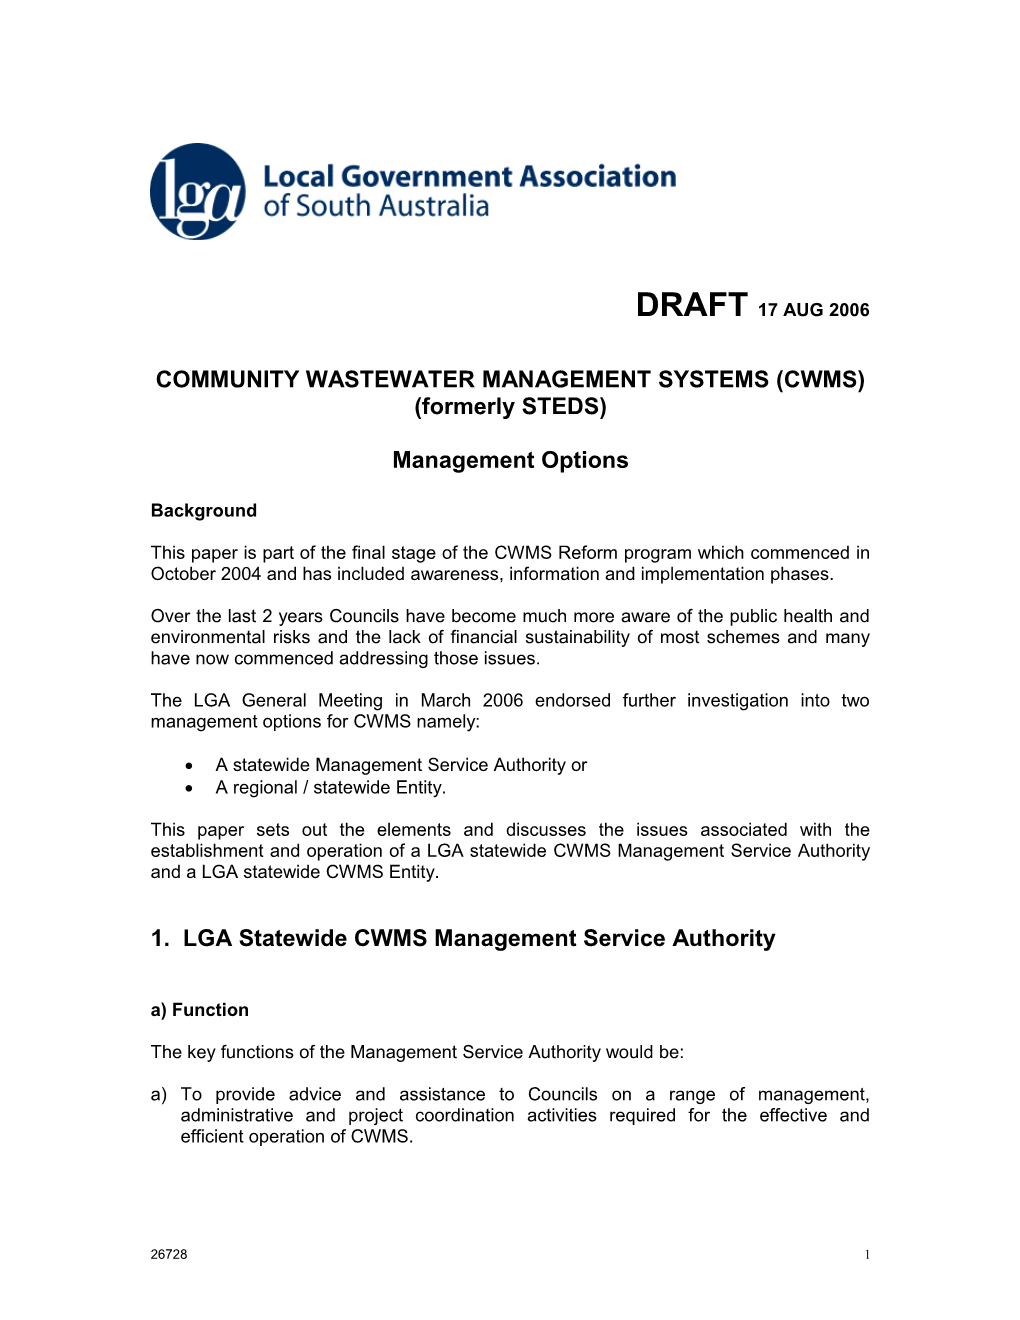 Community Wastewater Management Systems (Cwms)